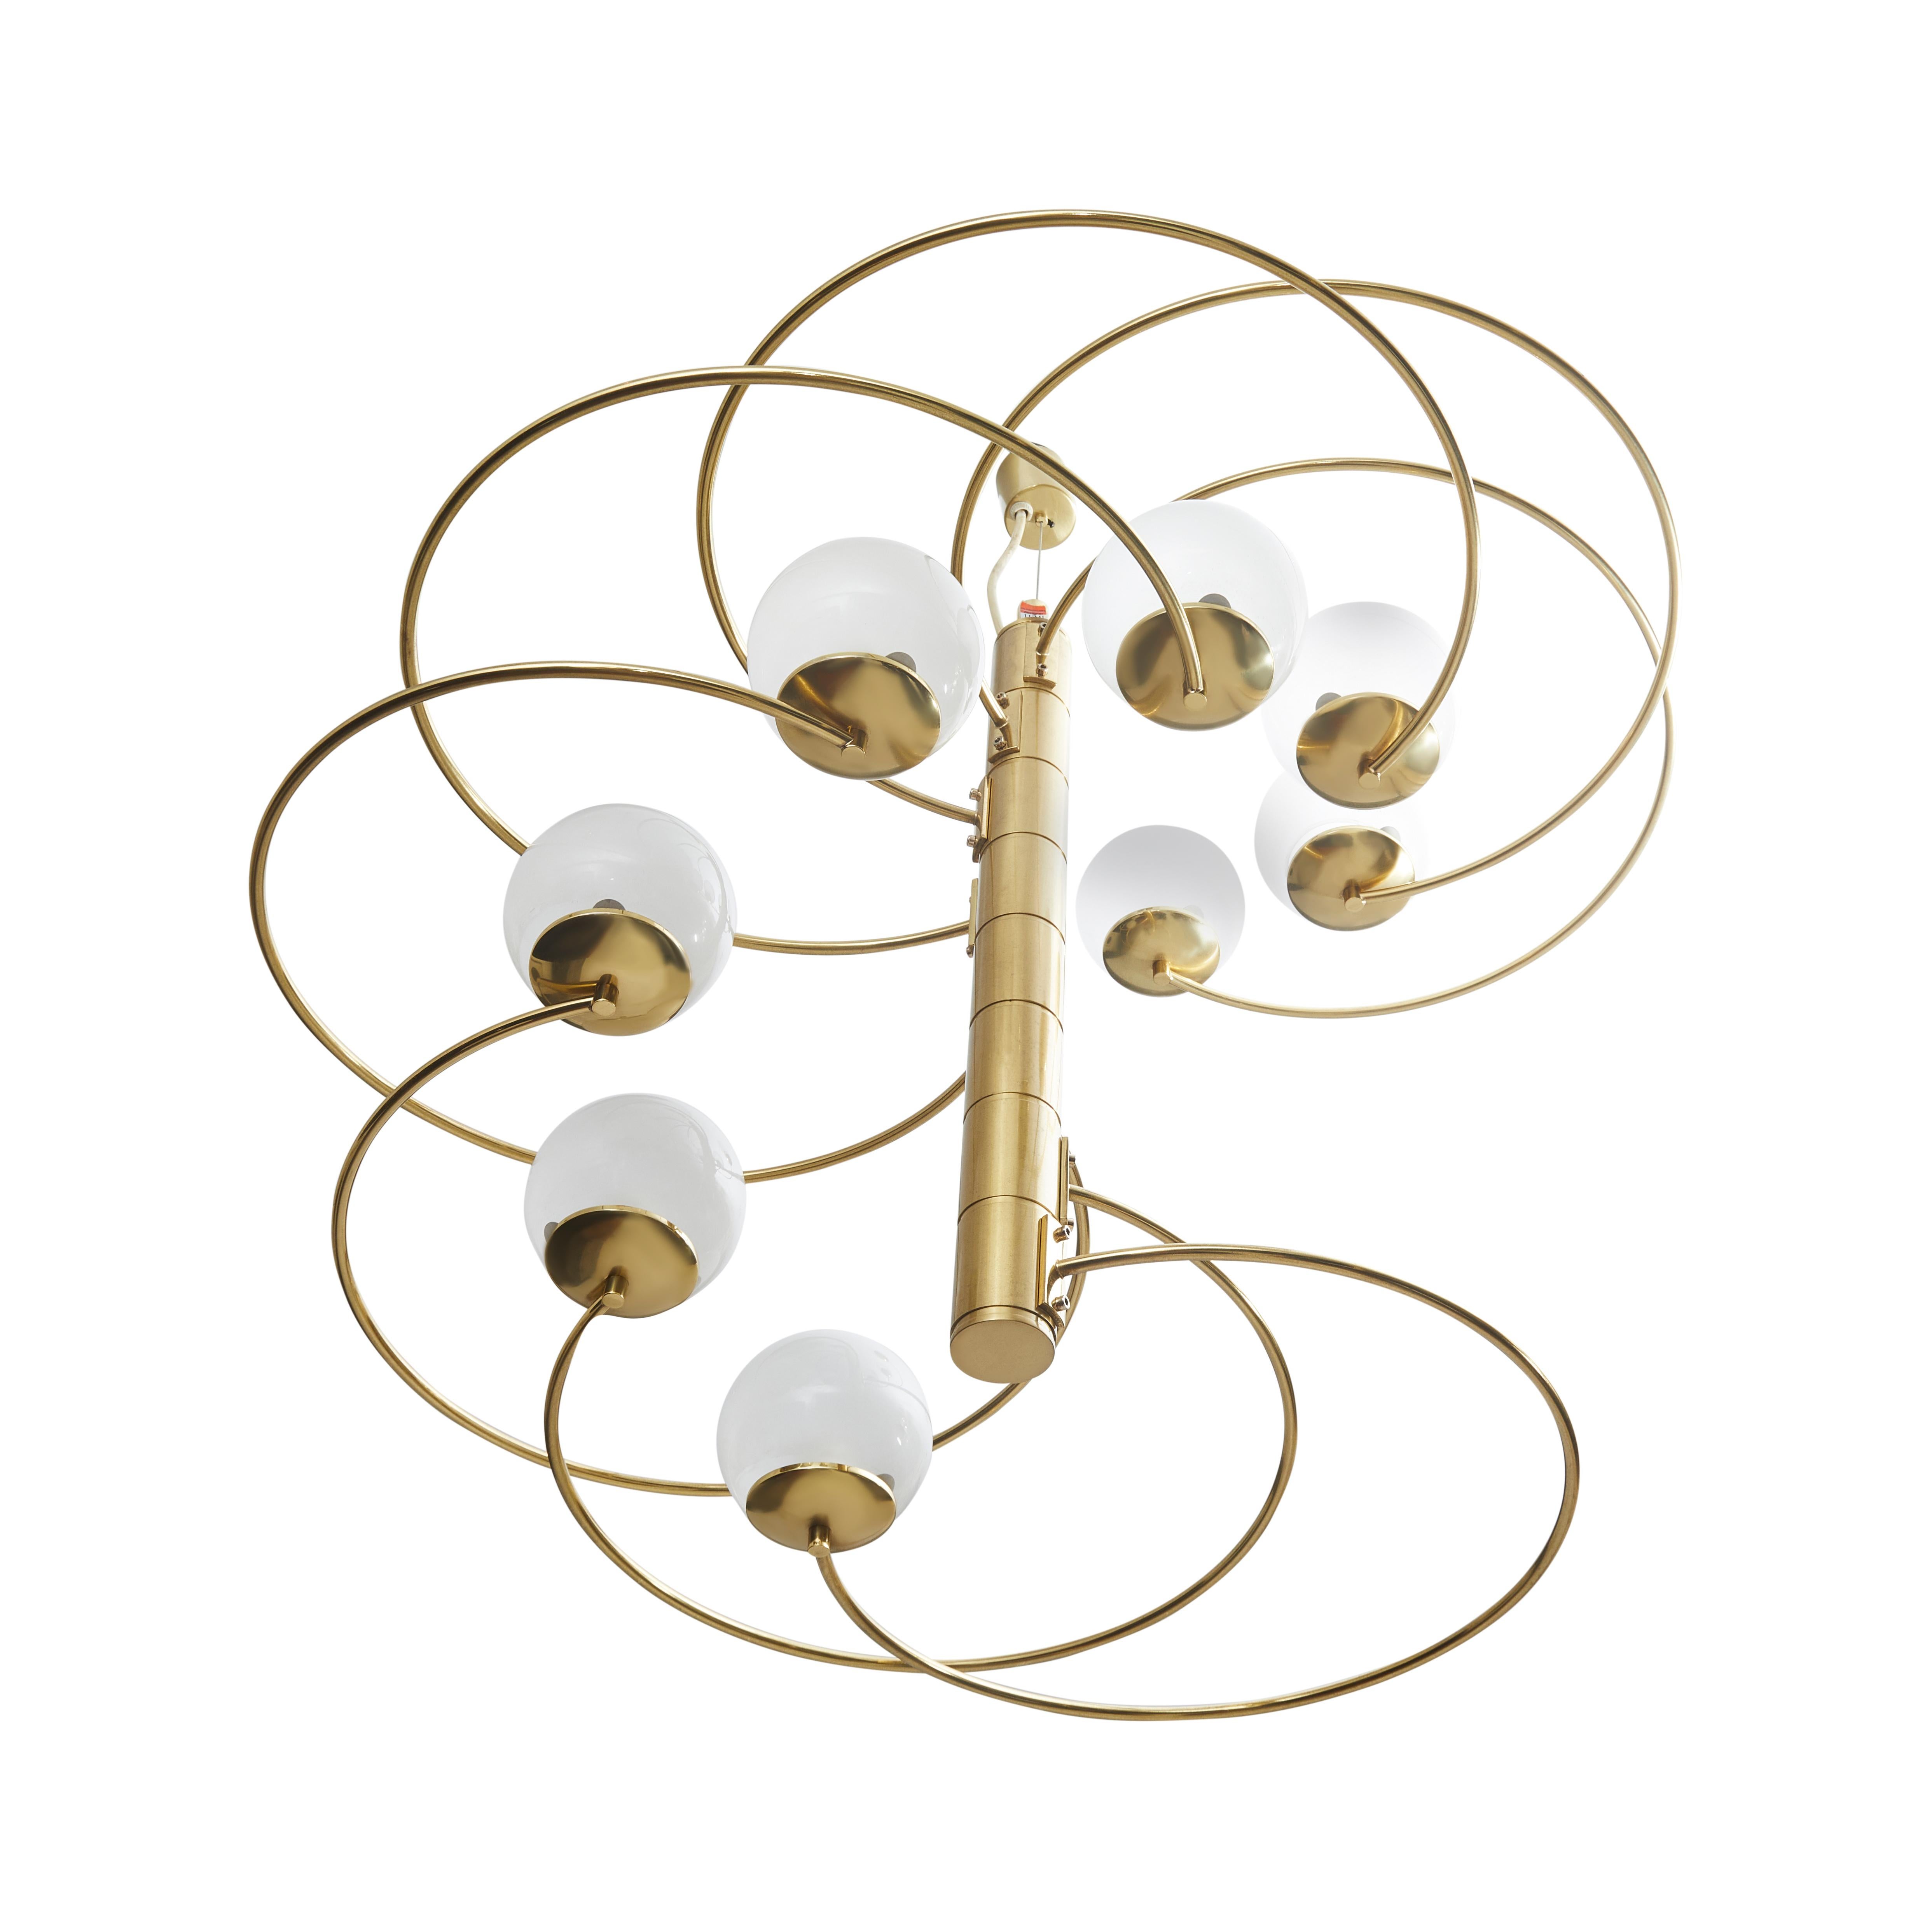 Italian Pair of Mid Century Modern Chandeliers in Brass and Glass by Pia Guidetti Crippa